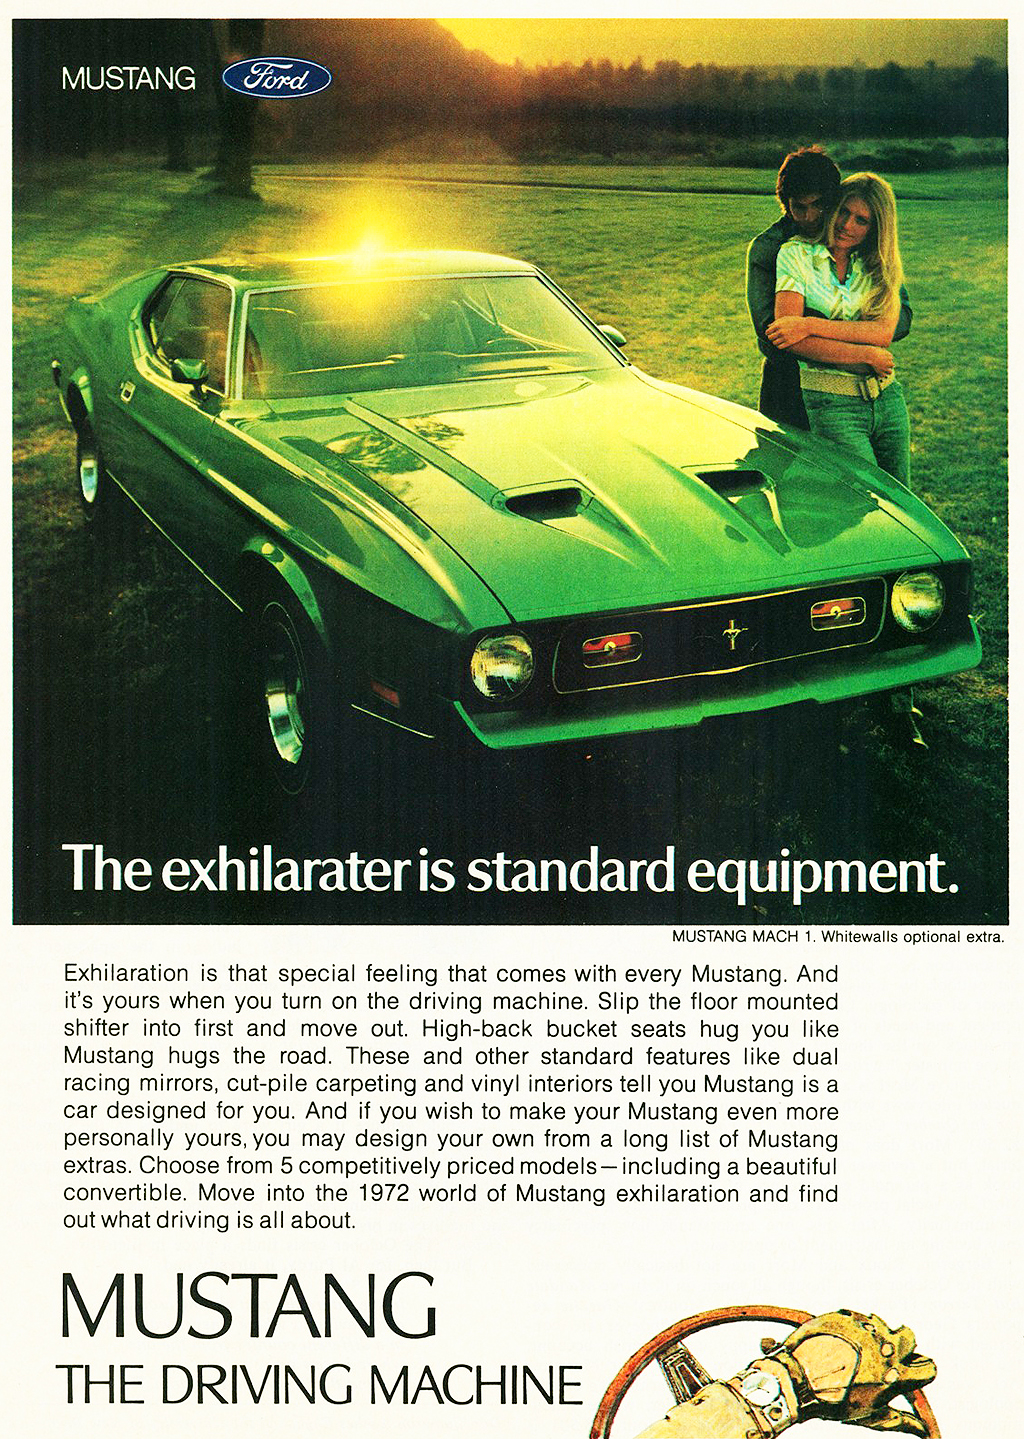 1972-Ford-Mustang-Mach-1-ad.jpg